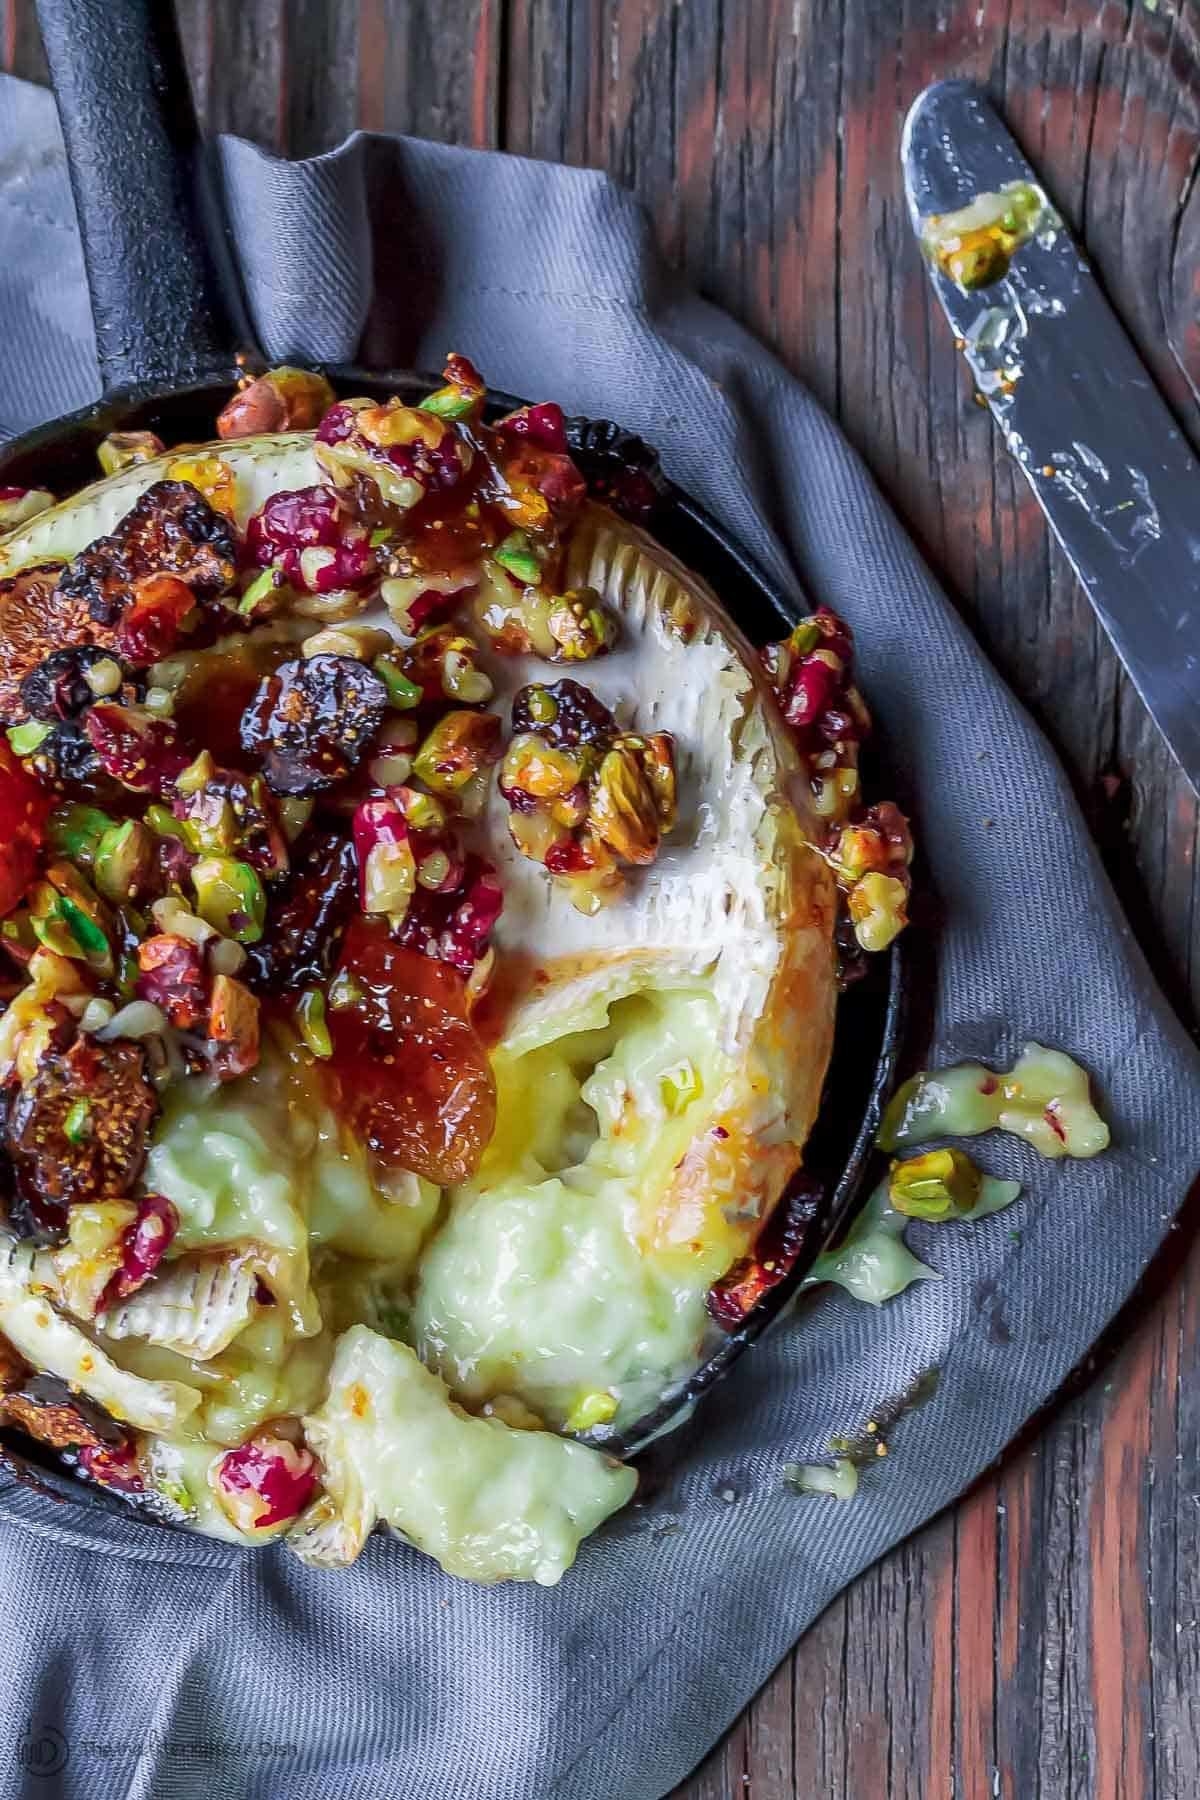 Baked Brie with Jam and Nuts